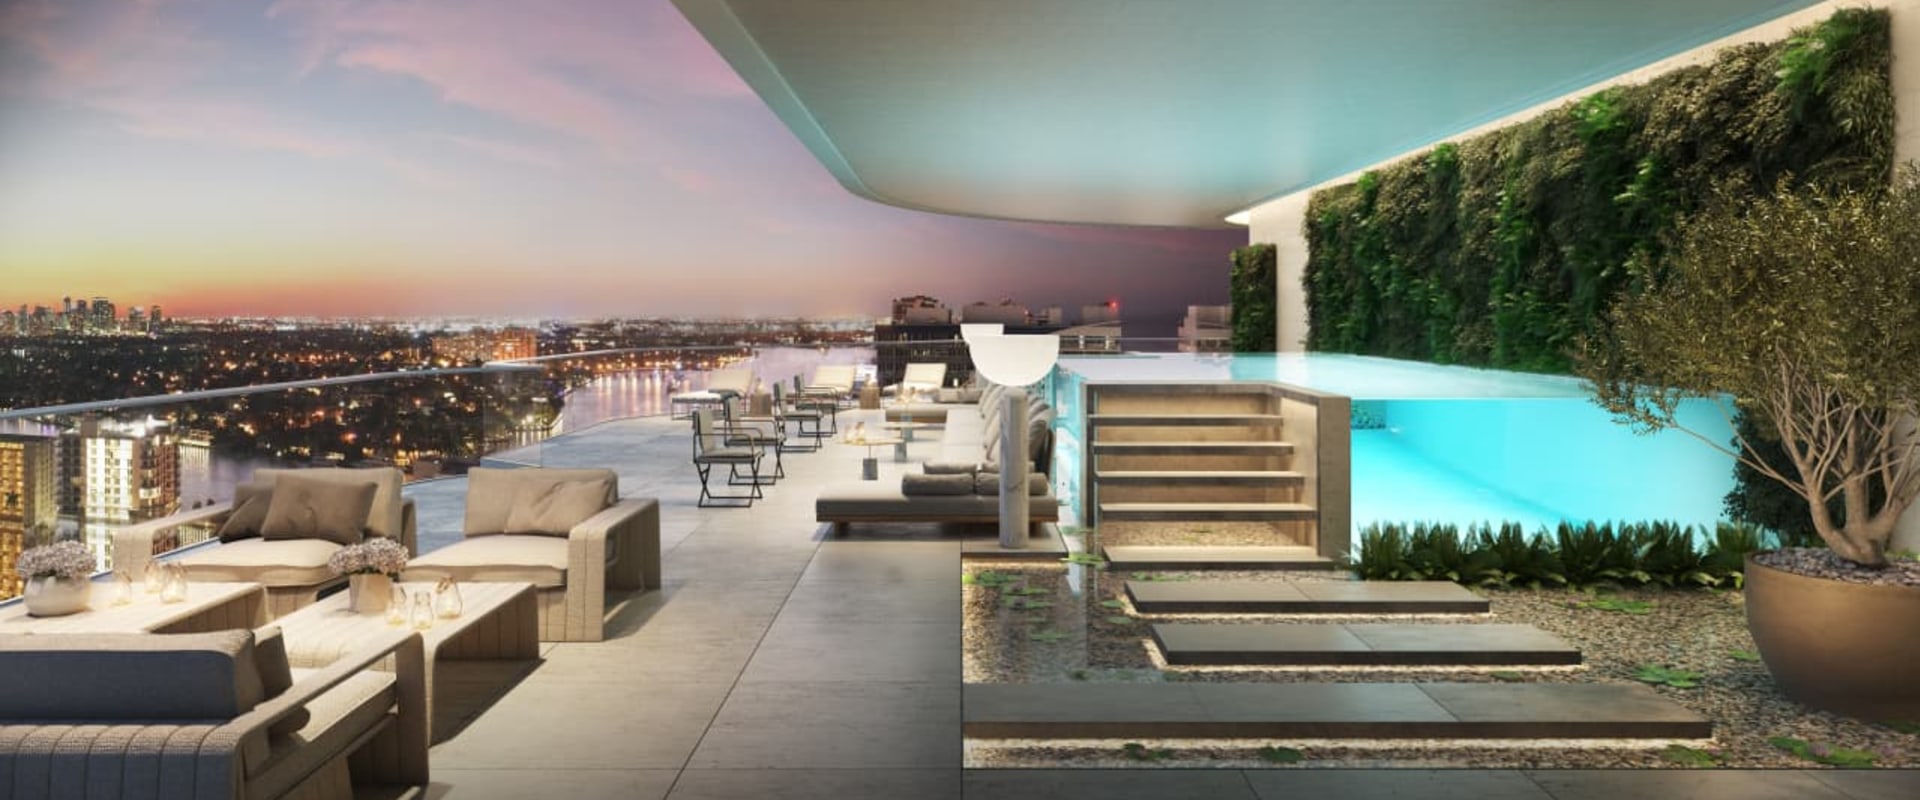 The Top Penthouses in Fort Lauderdale, FL